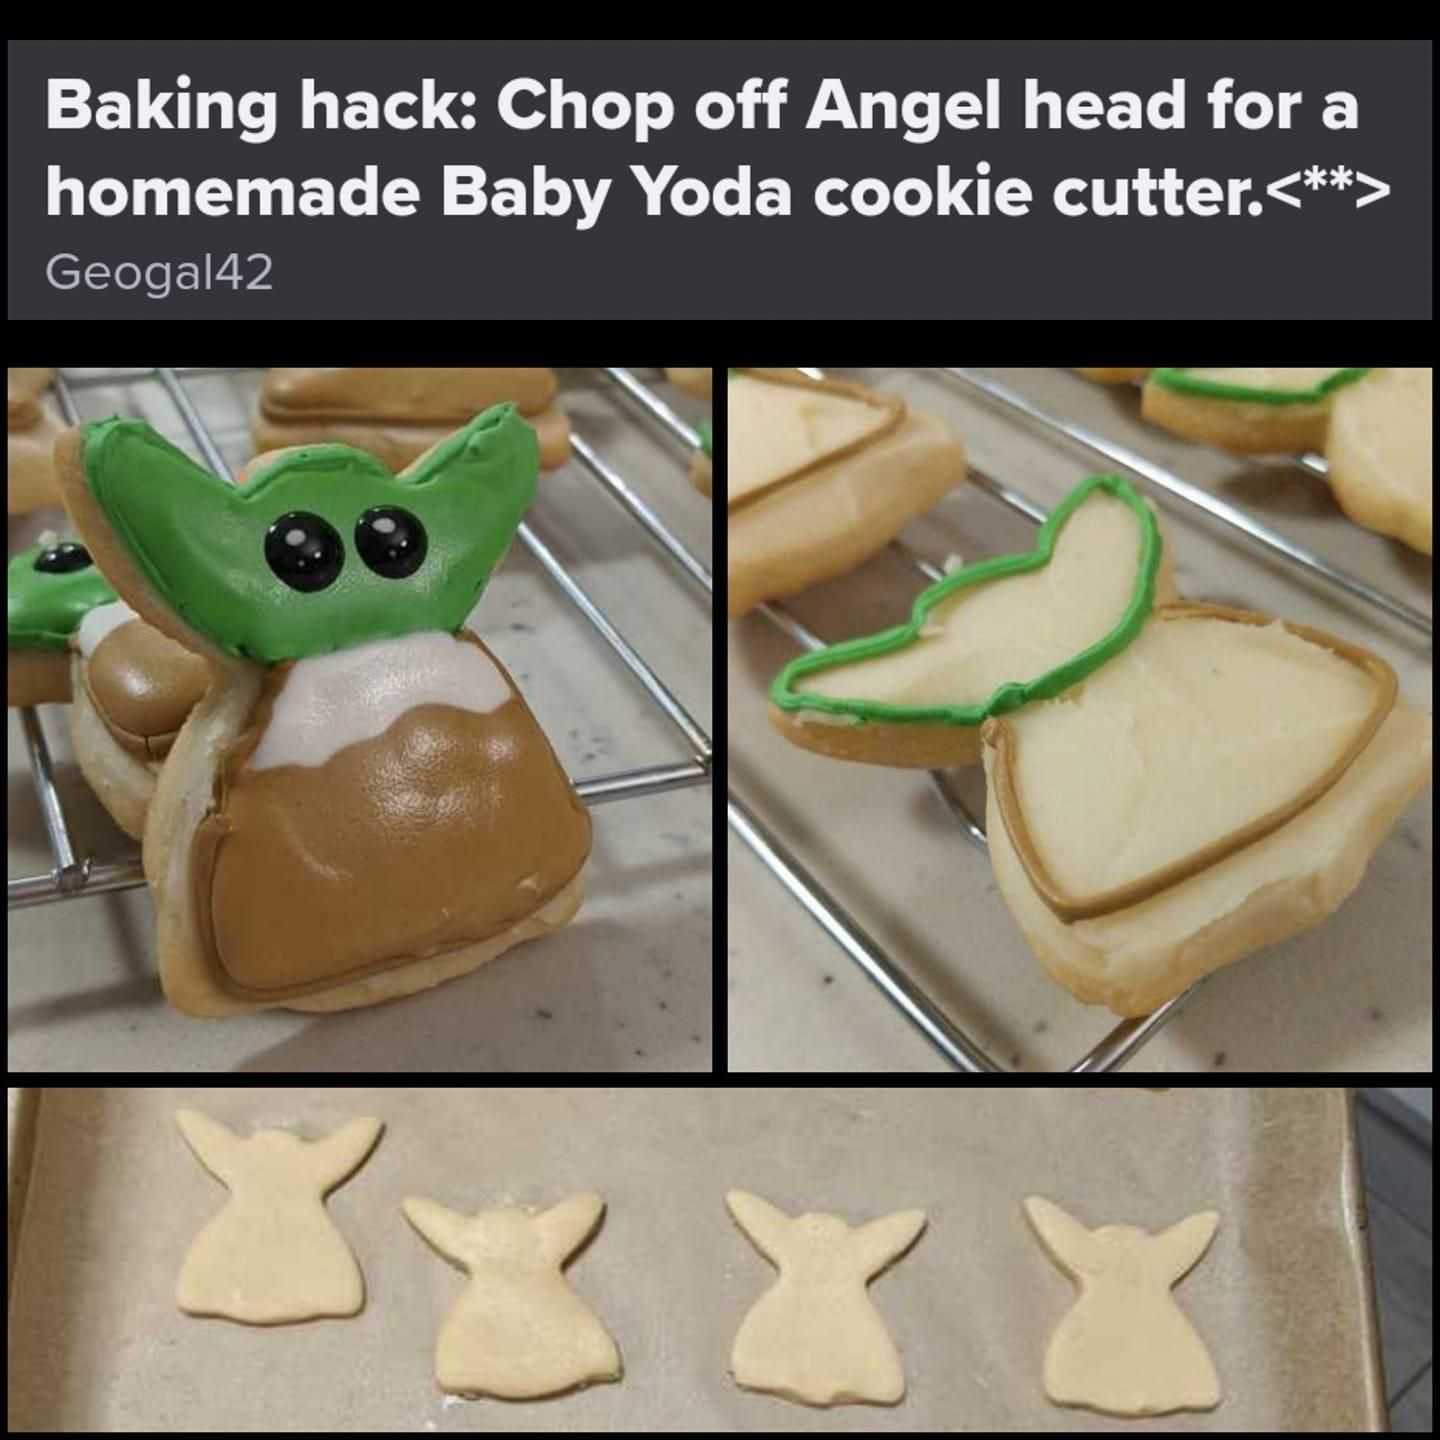 For the Rebel bakers out there